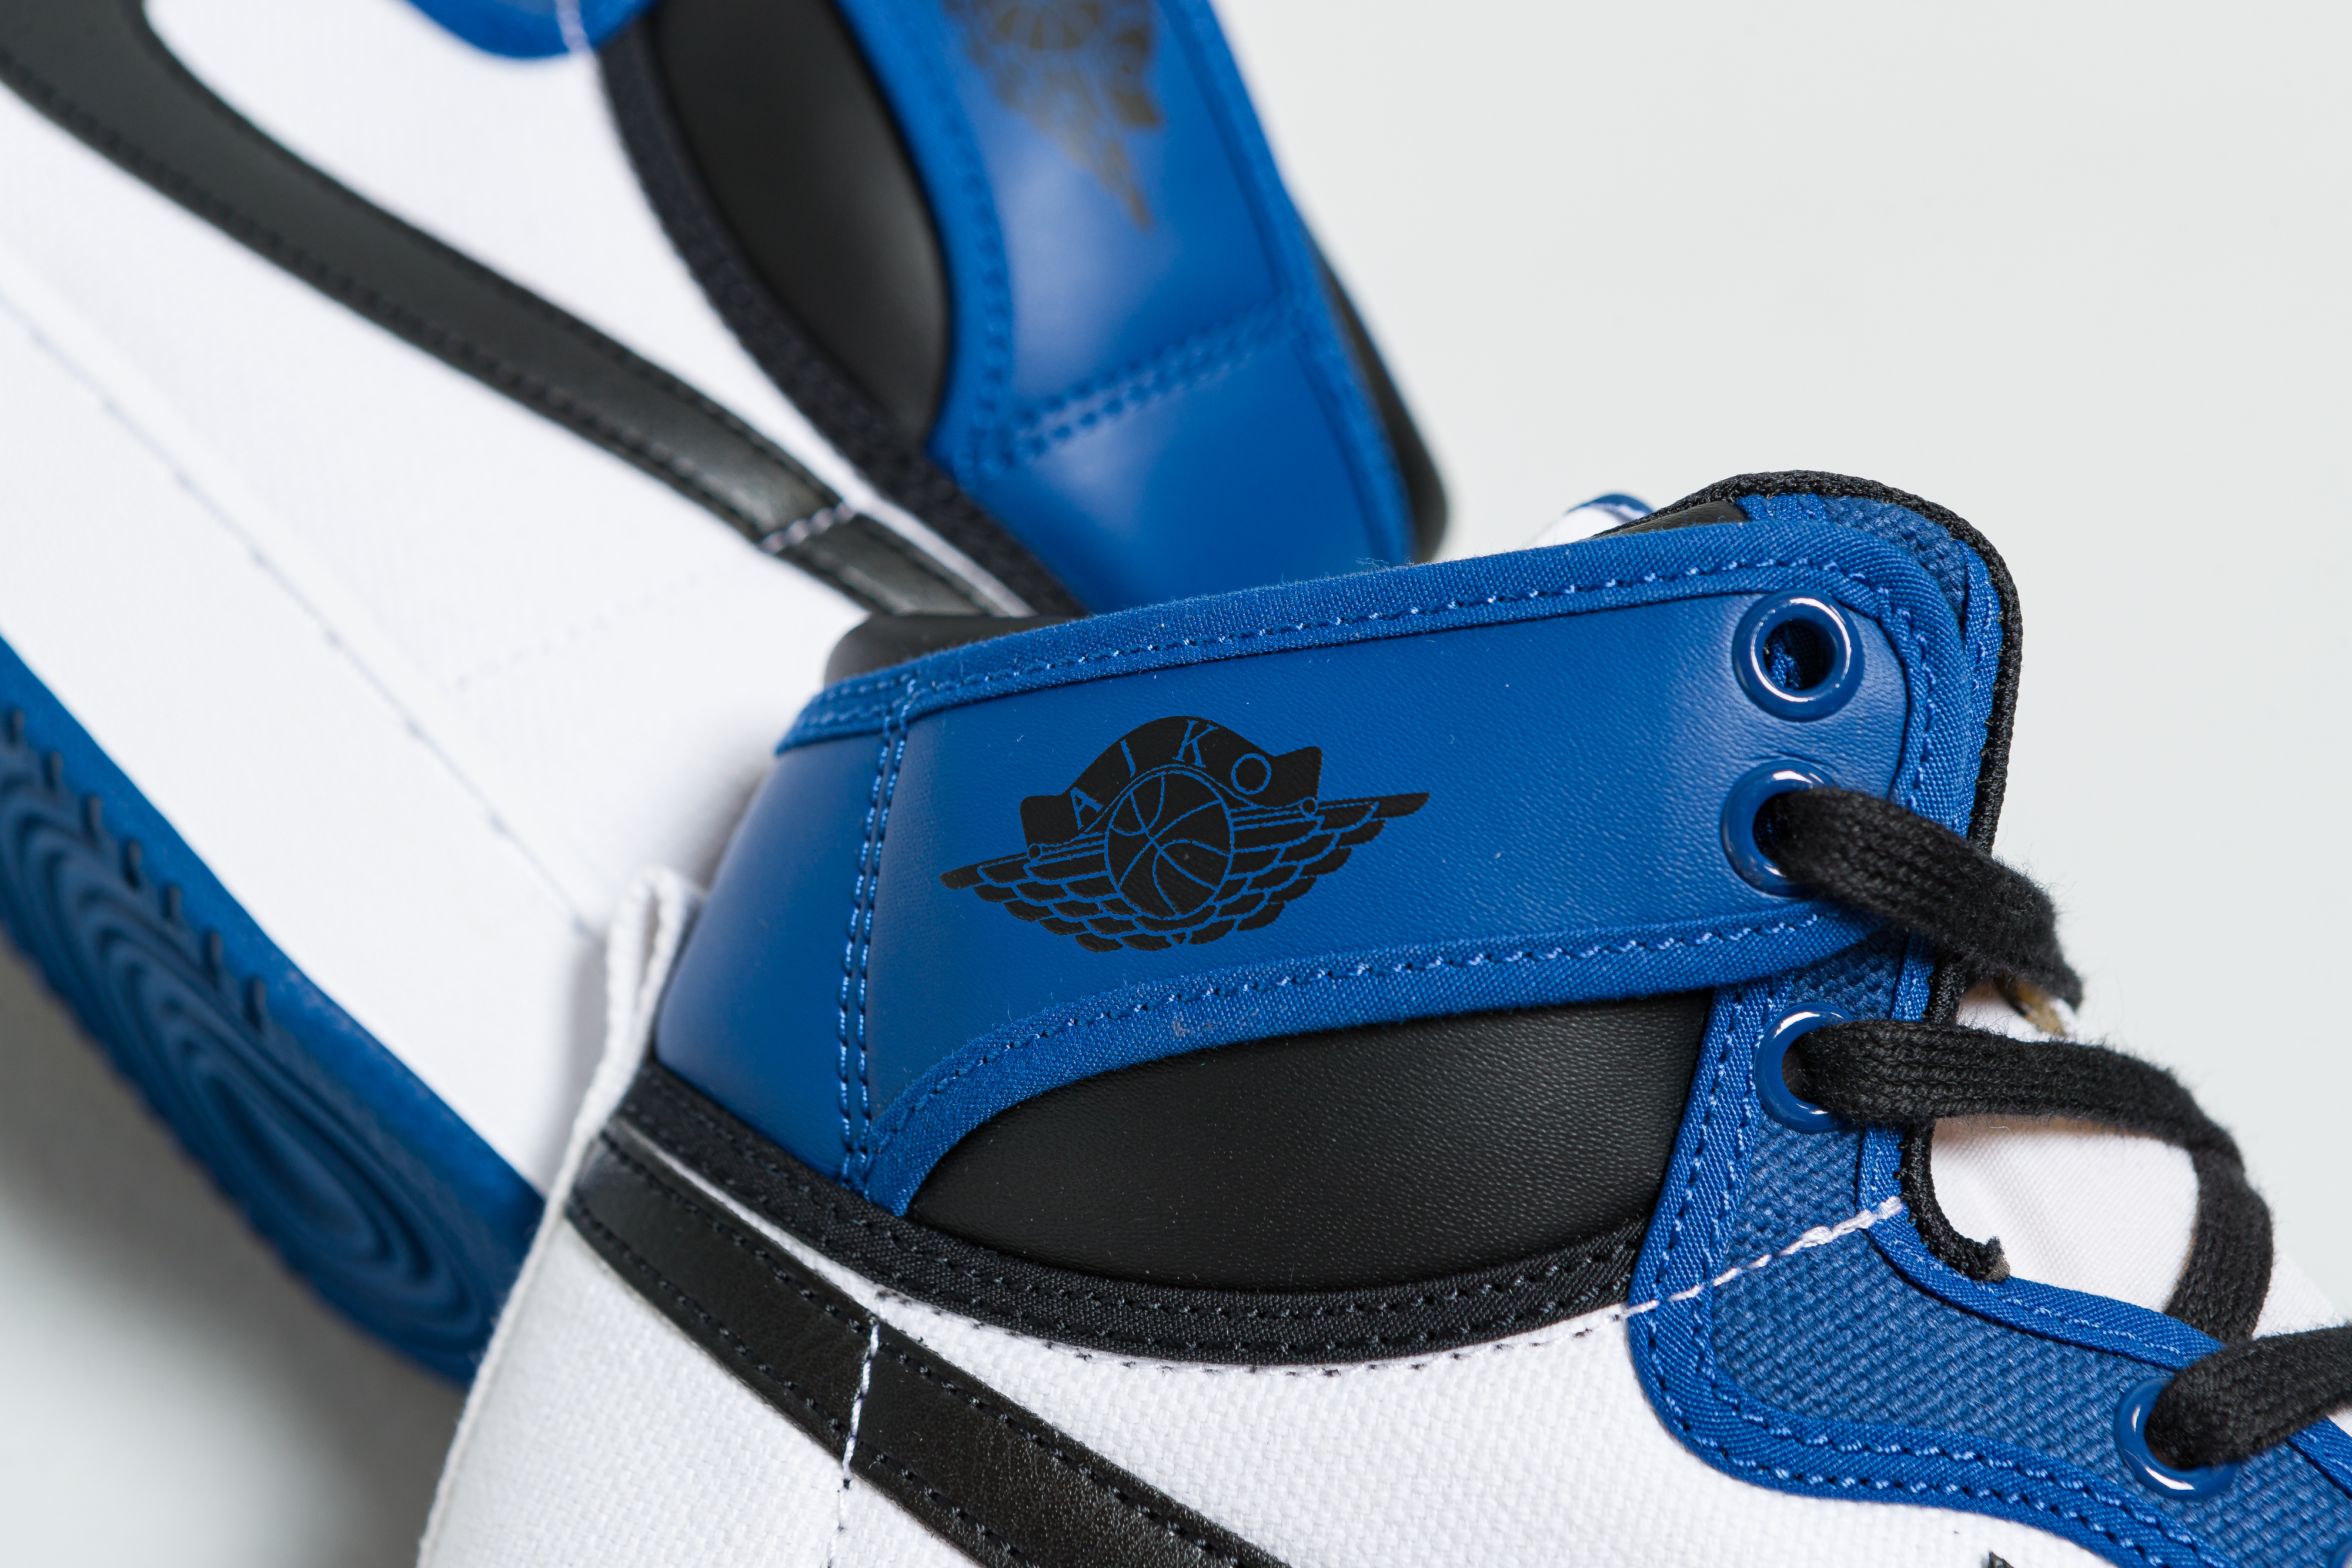 Up There Launches - Nike Air Jordan 1 KO 'Storm Blue’